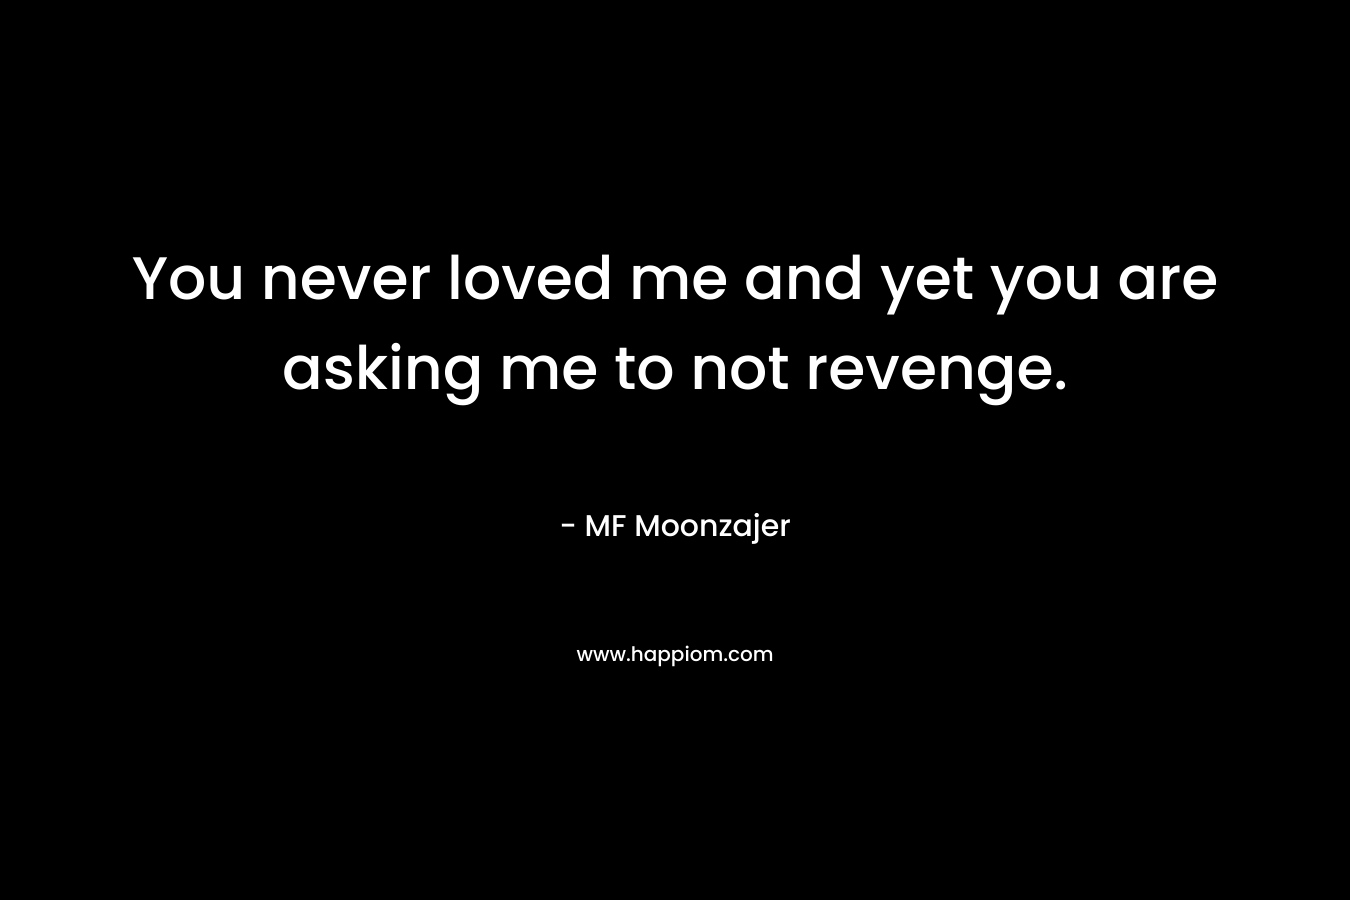 You never loved me and yet you are asking me to not revenge.